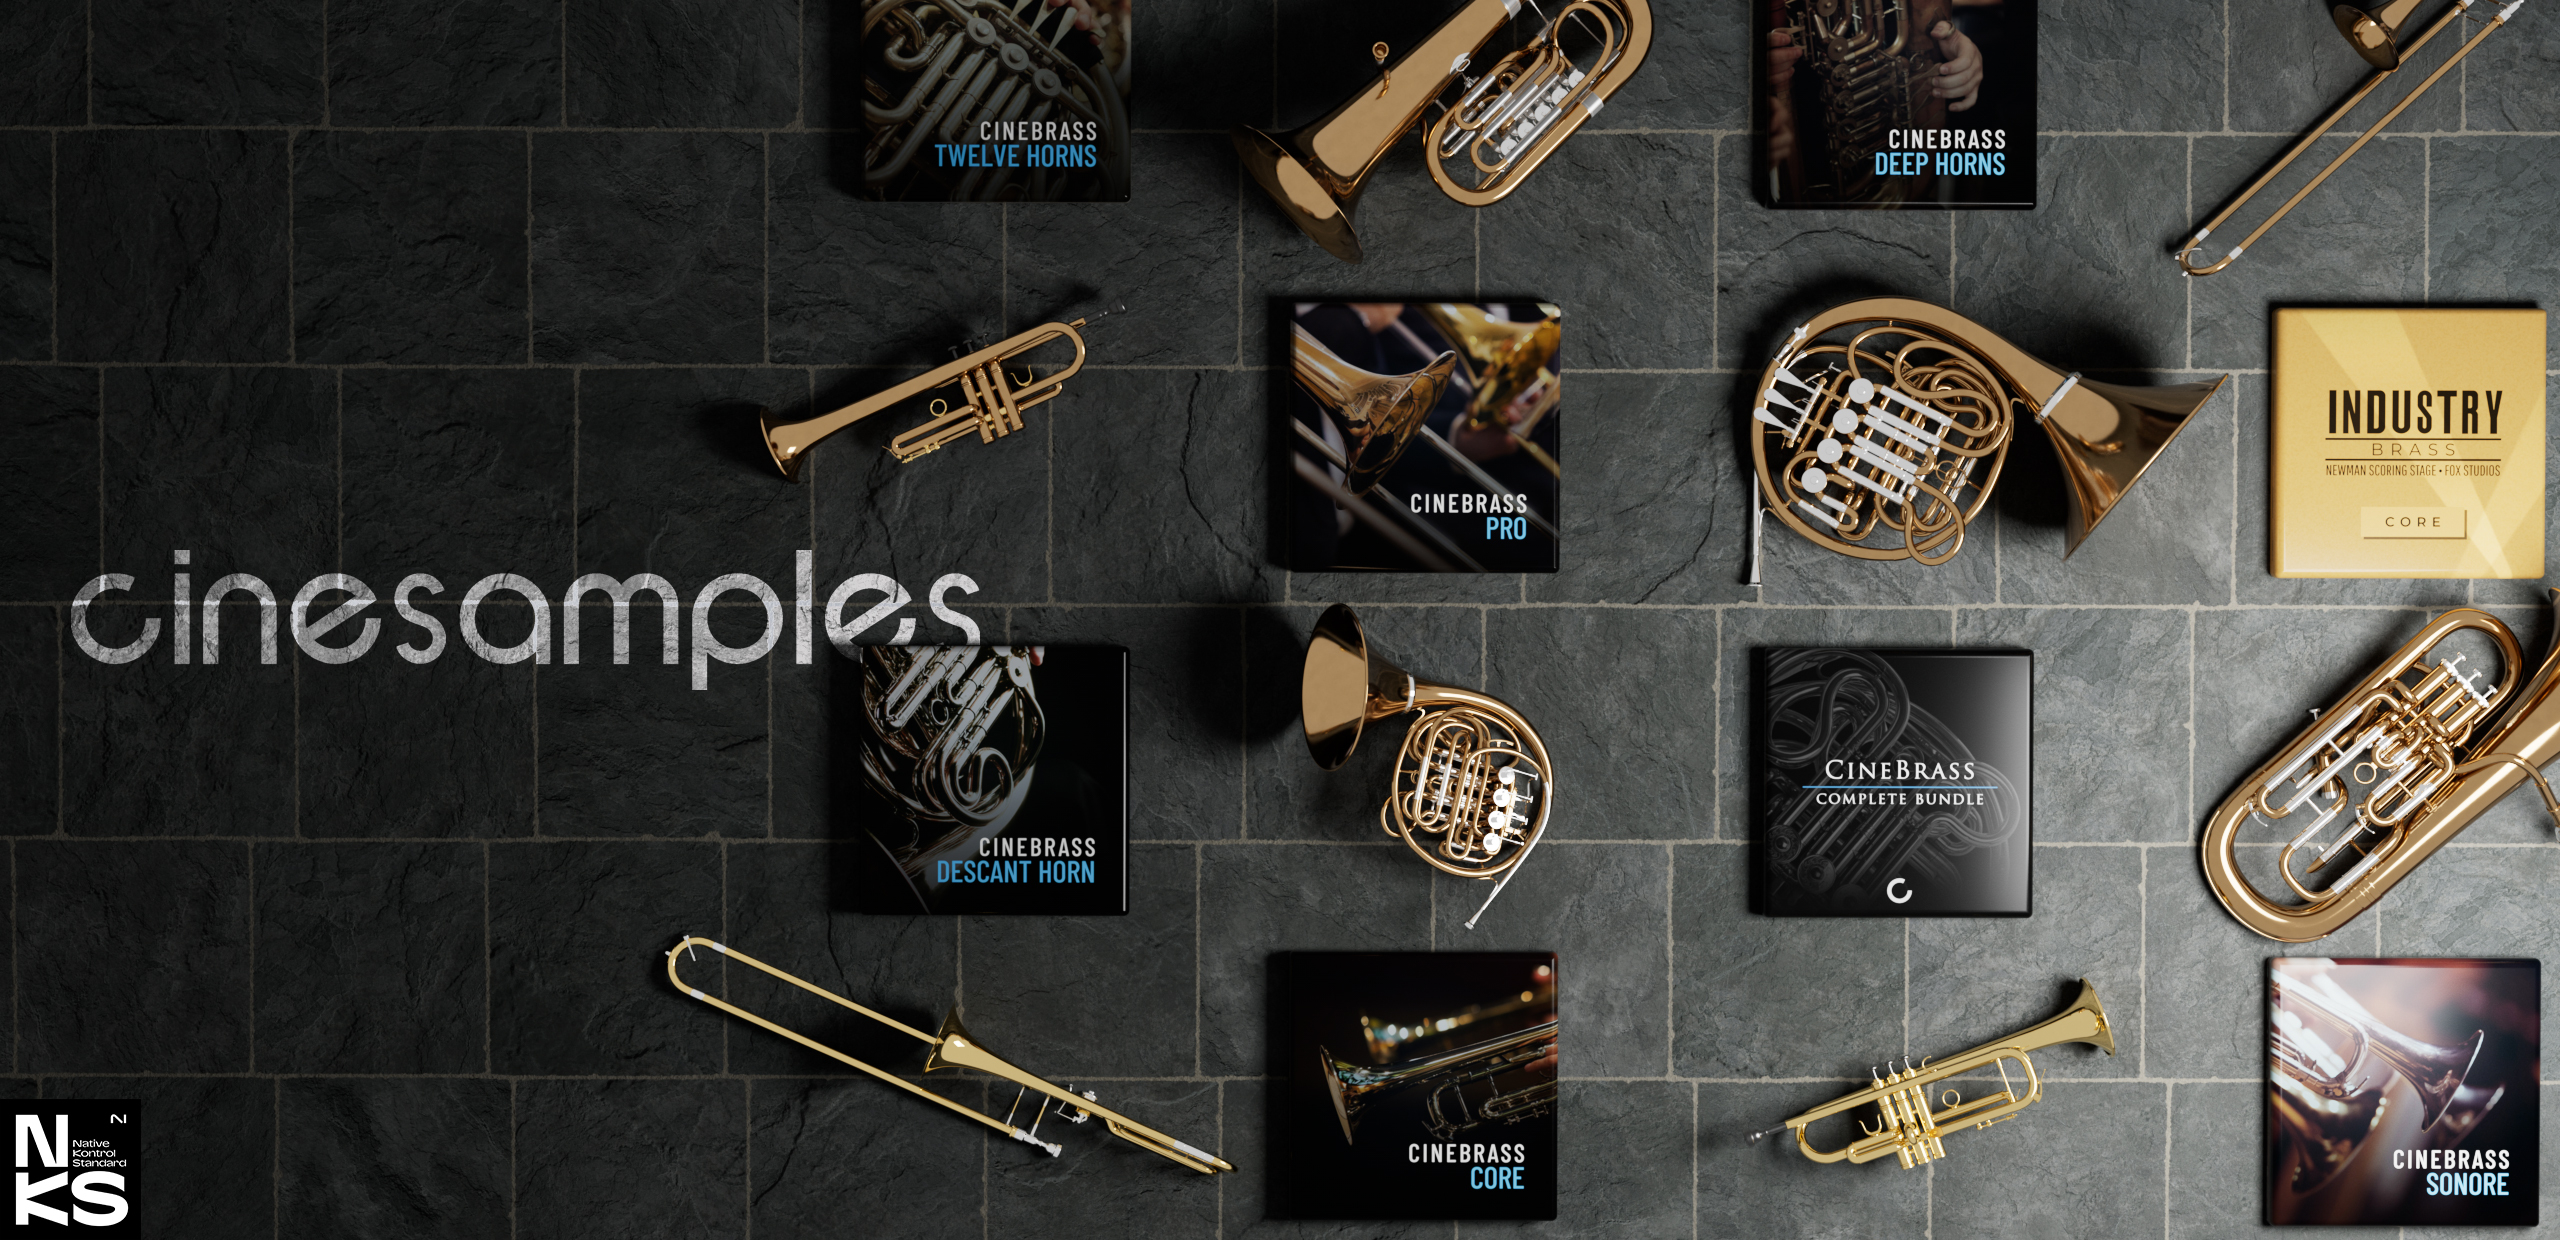 a dark tiled floor with various brass instruments and product boxes scattered around. The word “cinesamples” is prominently displayed in the center. The product boxes include labels such as “CINEBRASS TWELVE HORNS,” “CINEBRASS DEEP HORNS,” “CINEBRASS PRO,” “CINEBRASS DESCANT HORN,” “CINEBRASS COMPLETE BUNDLE,” “INDUSTRY BRASS,” “CINEBRASS CORE,” and “CINEBRASS SONORE.” The instruments visible are trumpets, French horns, and trombones.